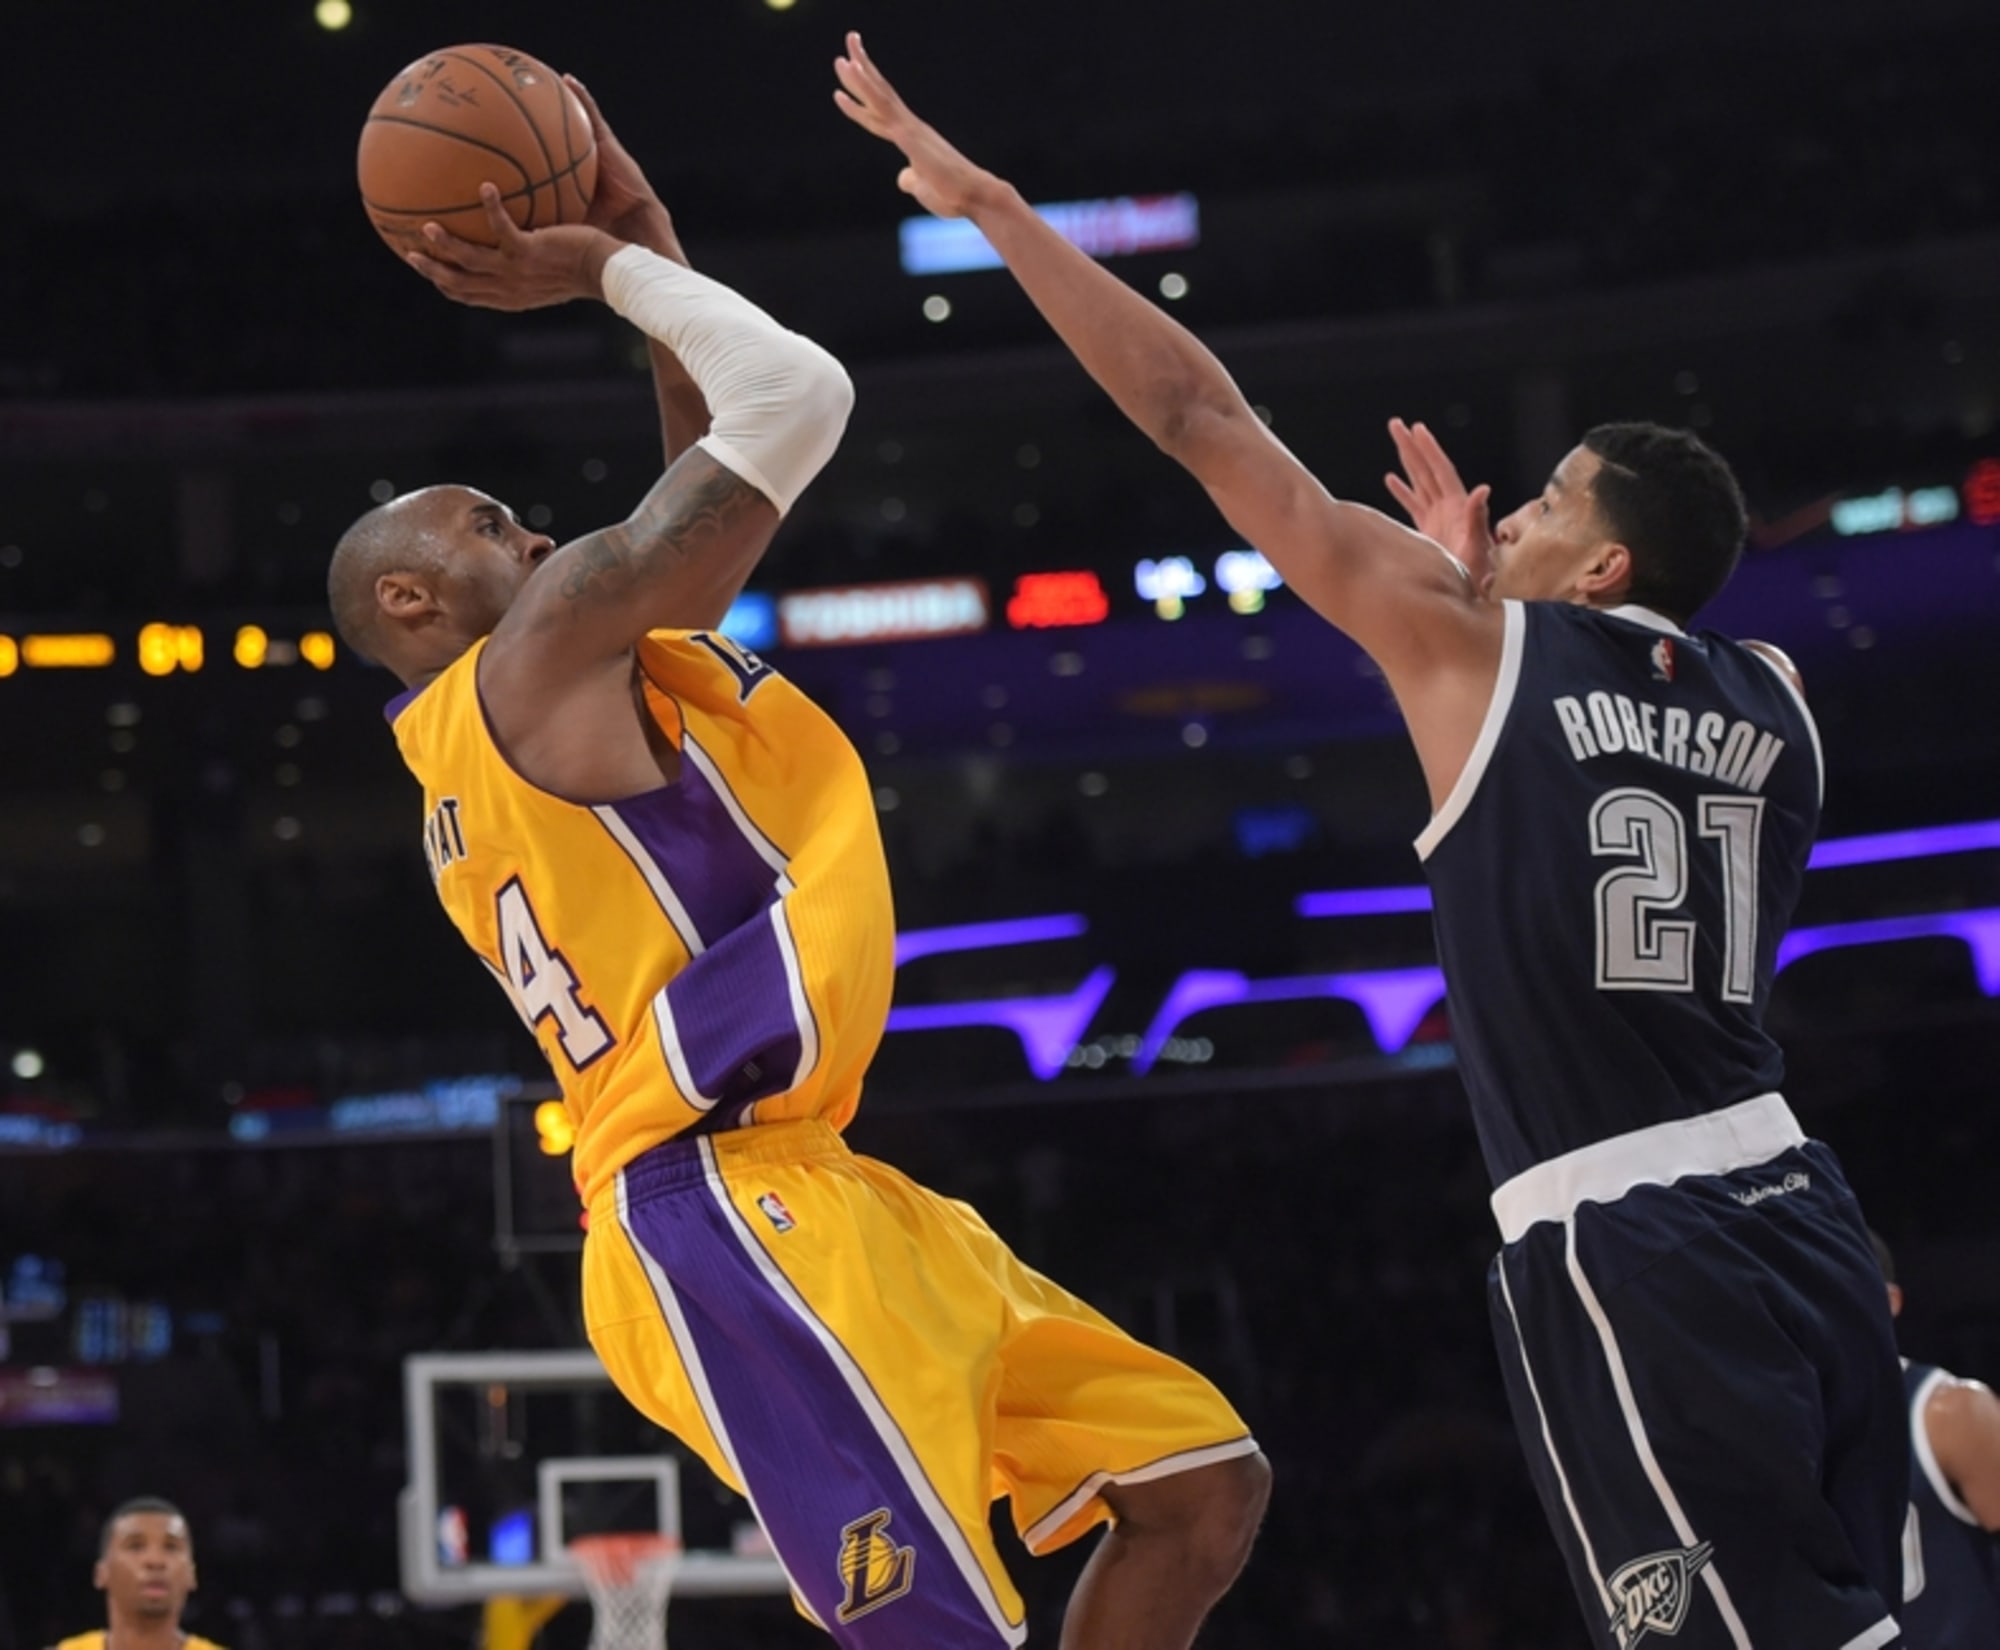 Kobe Bryant of the Los Angeles Lakers dunks on the Detroit Pistons